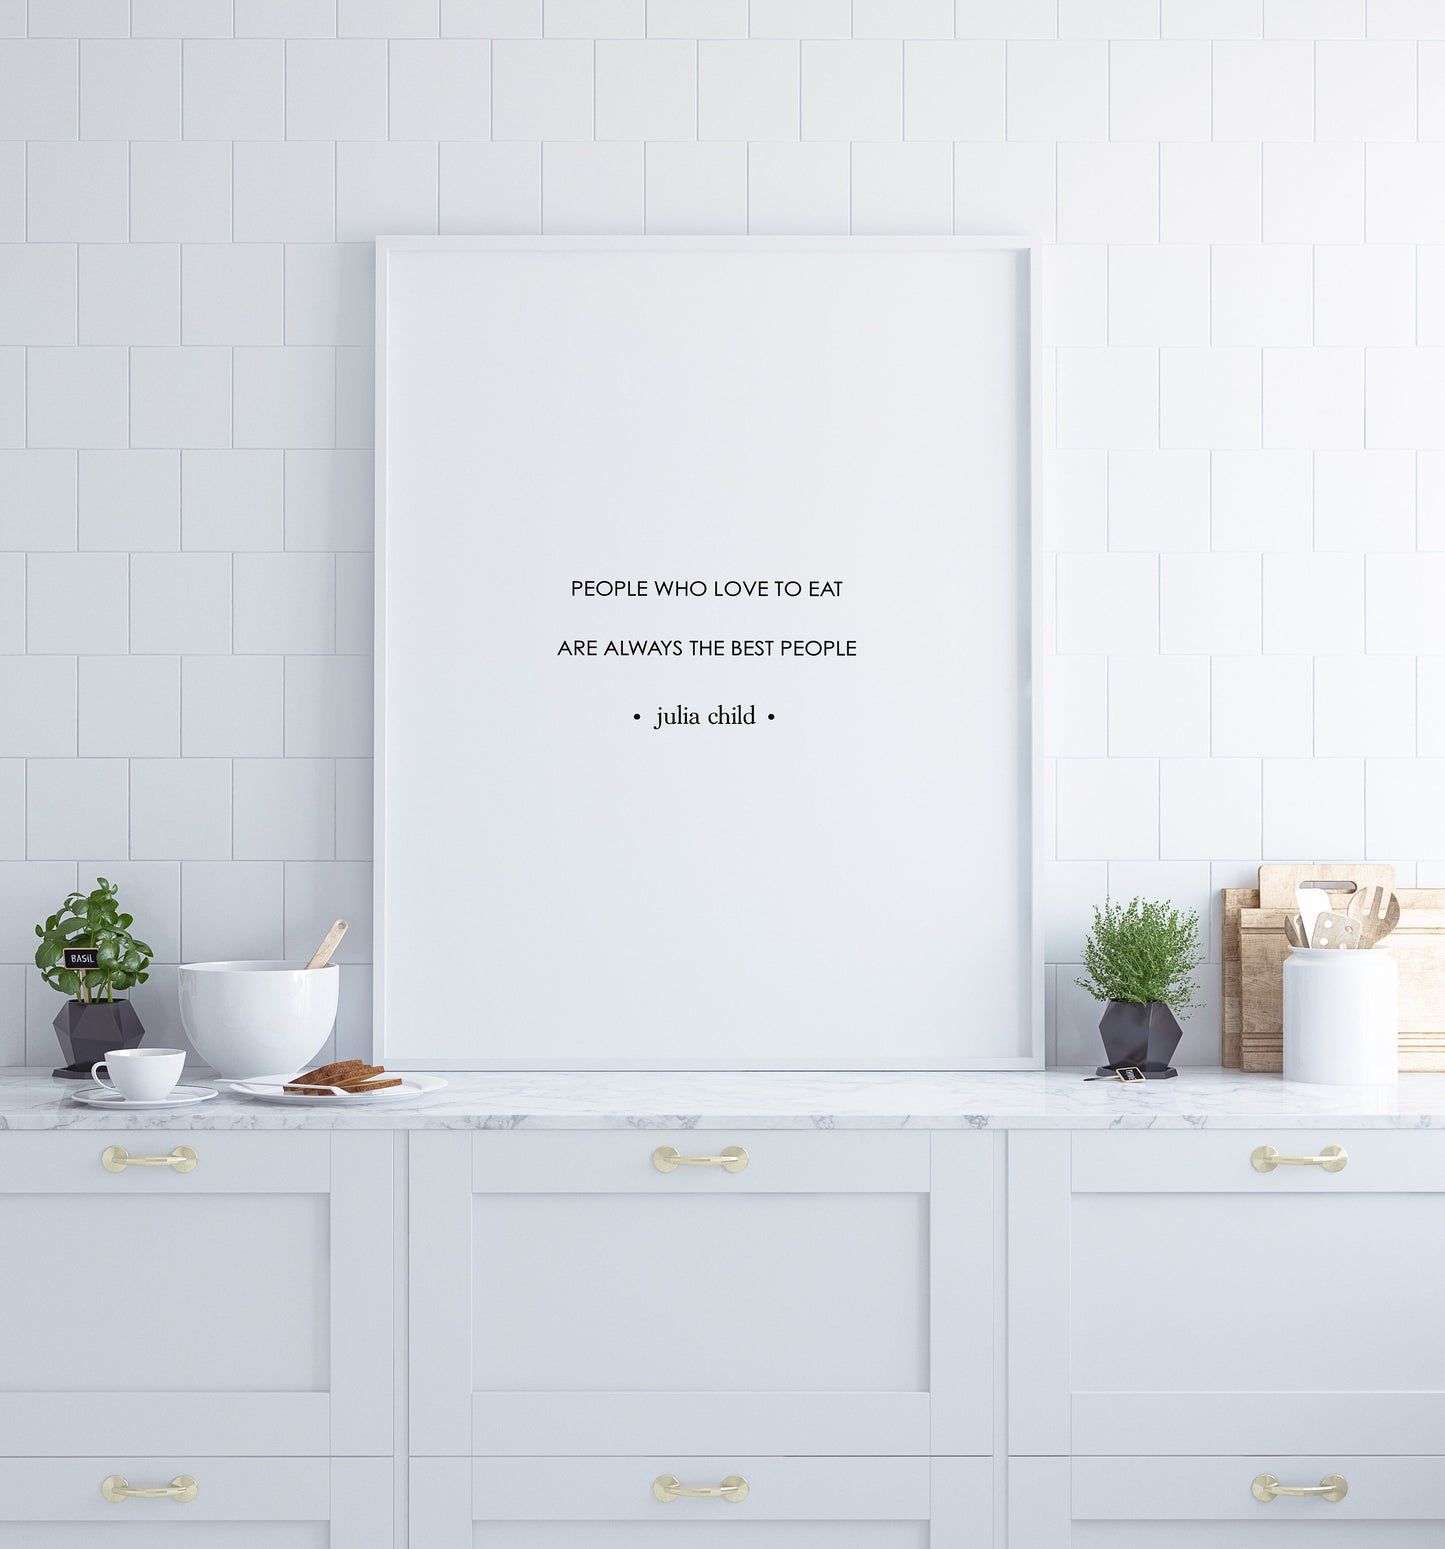 People who love to eat are always the best people,Julia Child quote,Kitchen decor,Kitchen wall art,Foodie gift,Dining room decor,Home decor